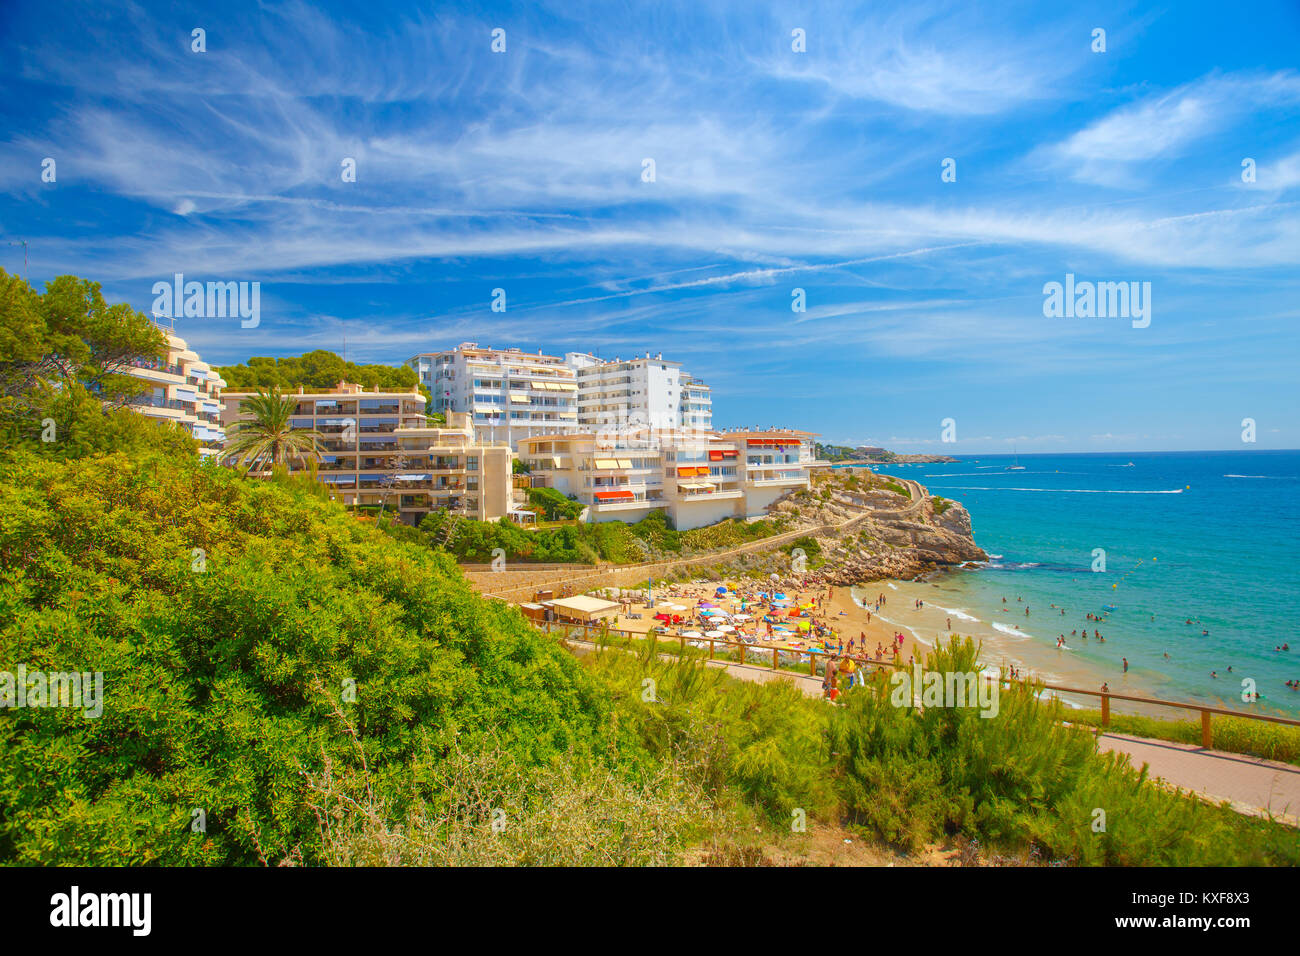 Spain resort cityscape, Salou. Clear blue sky above sea and hotels in Salou. Stock Photo